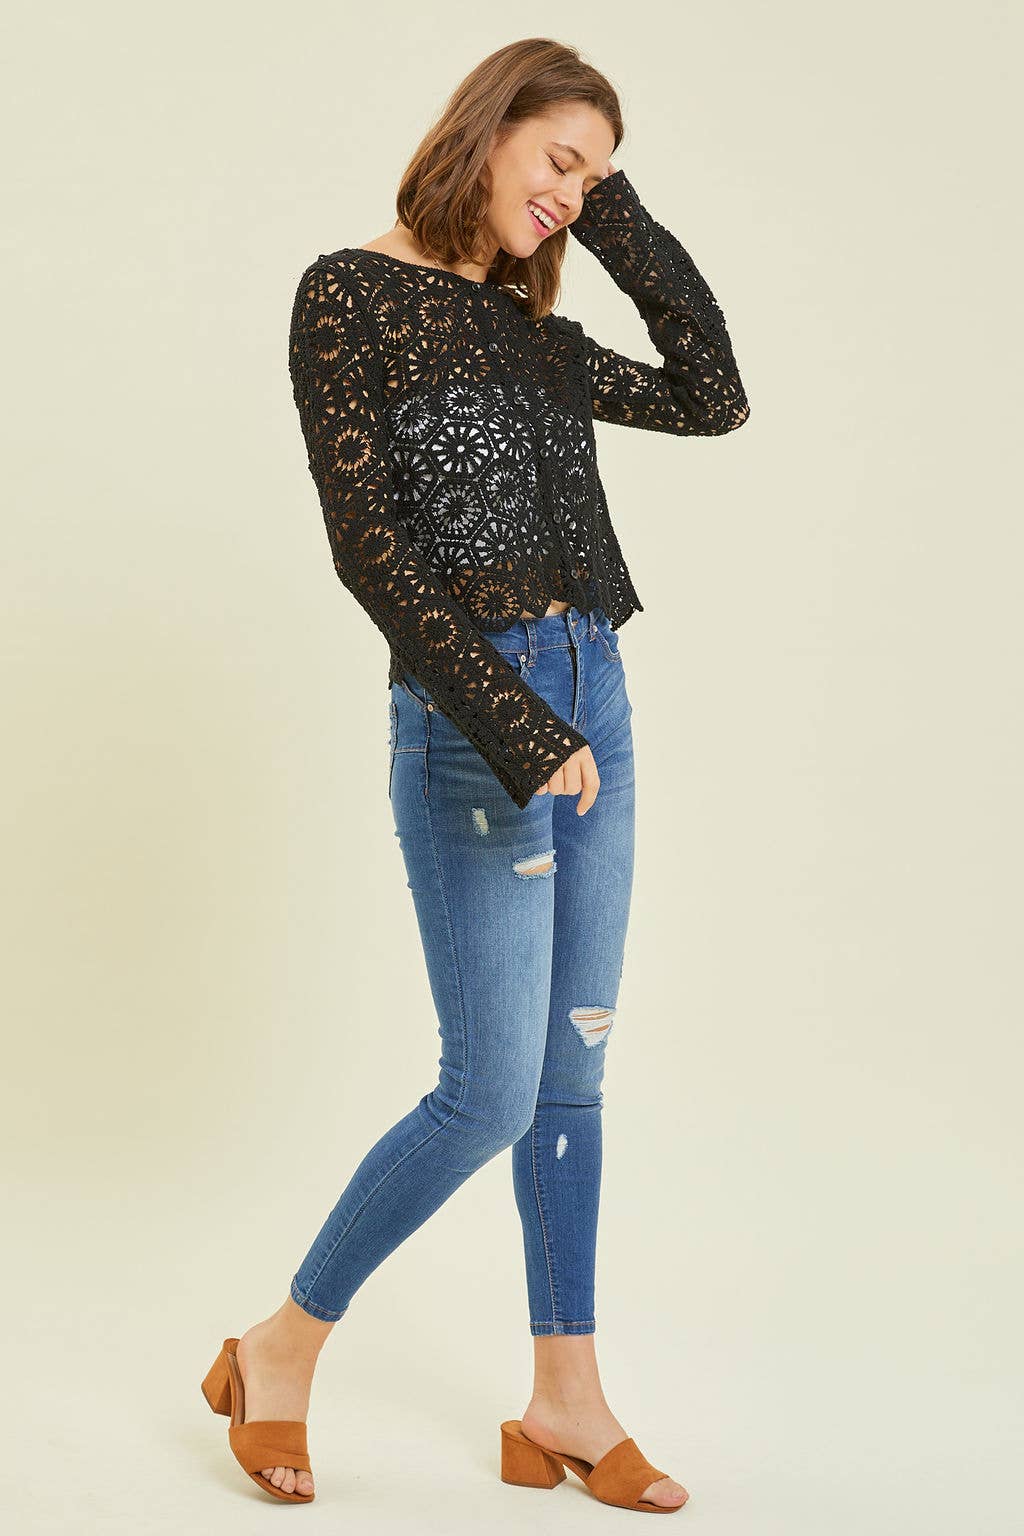 Crochet Lace Cropped Cardigan - Multiple Colors